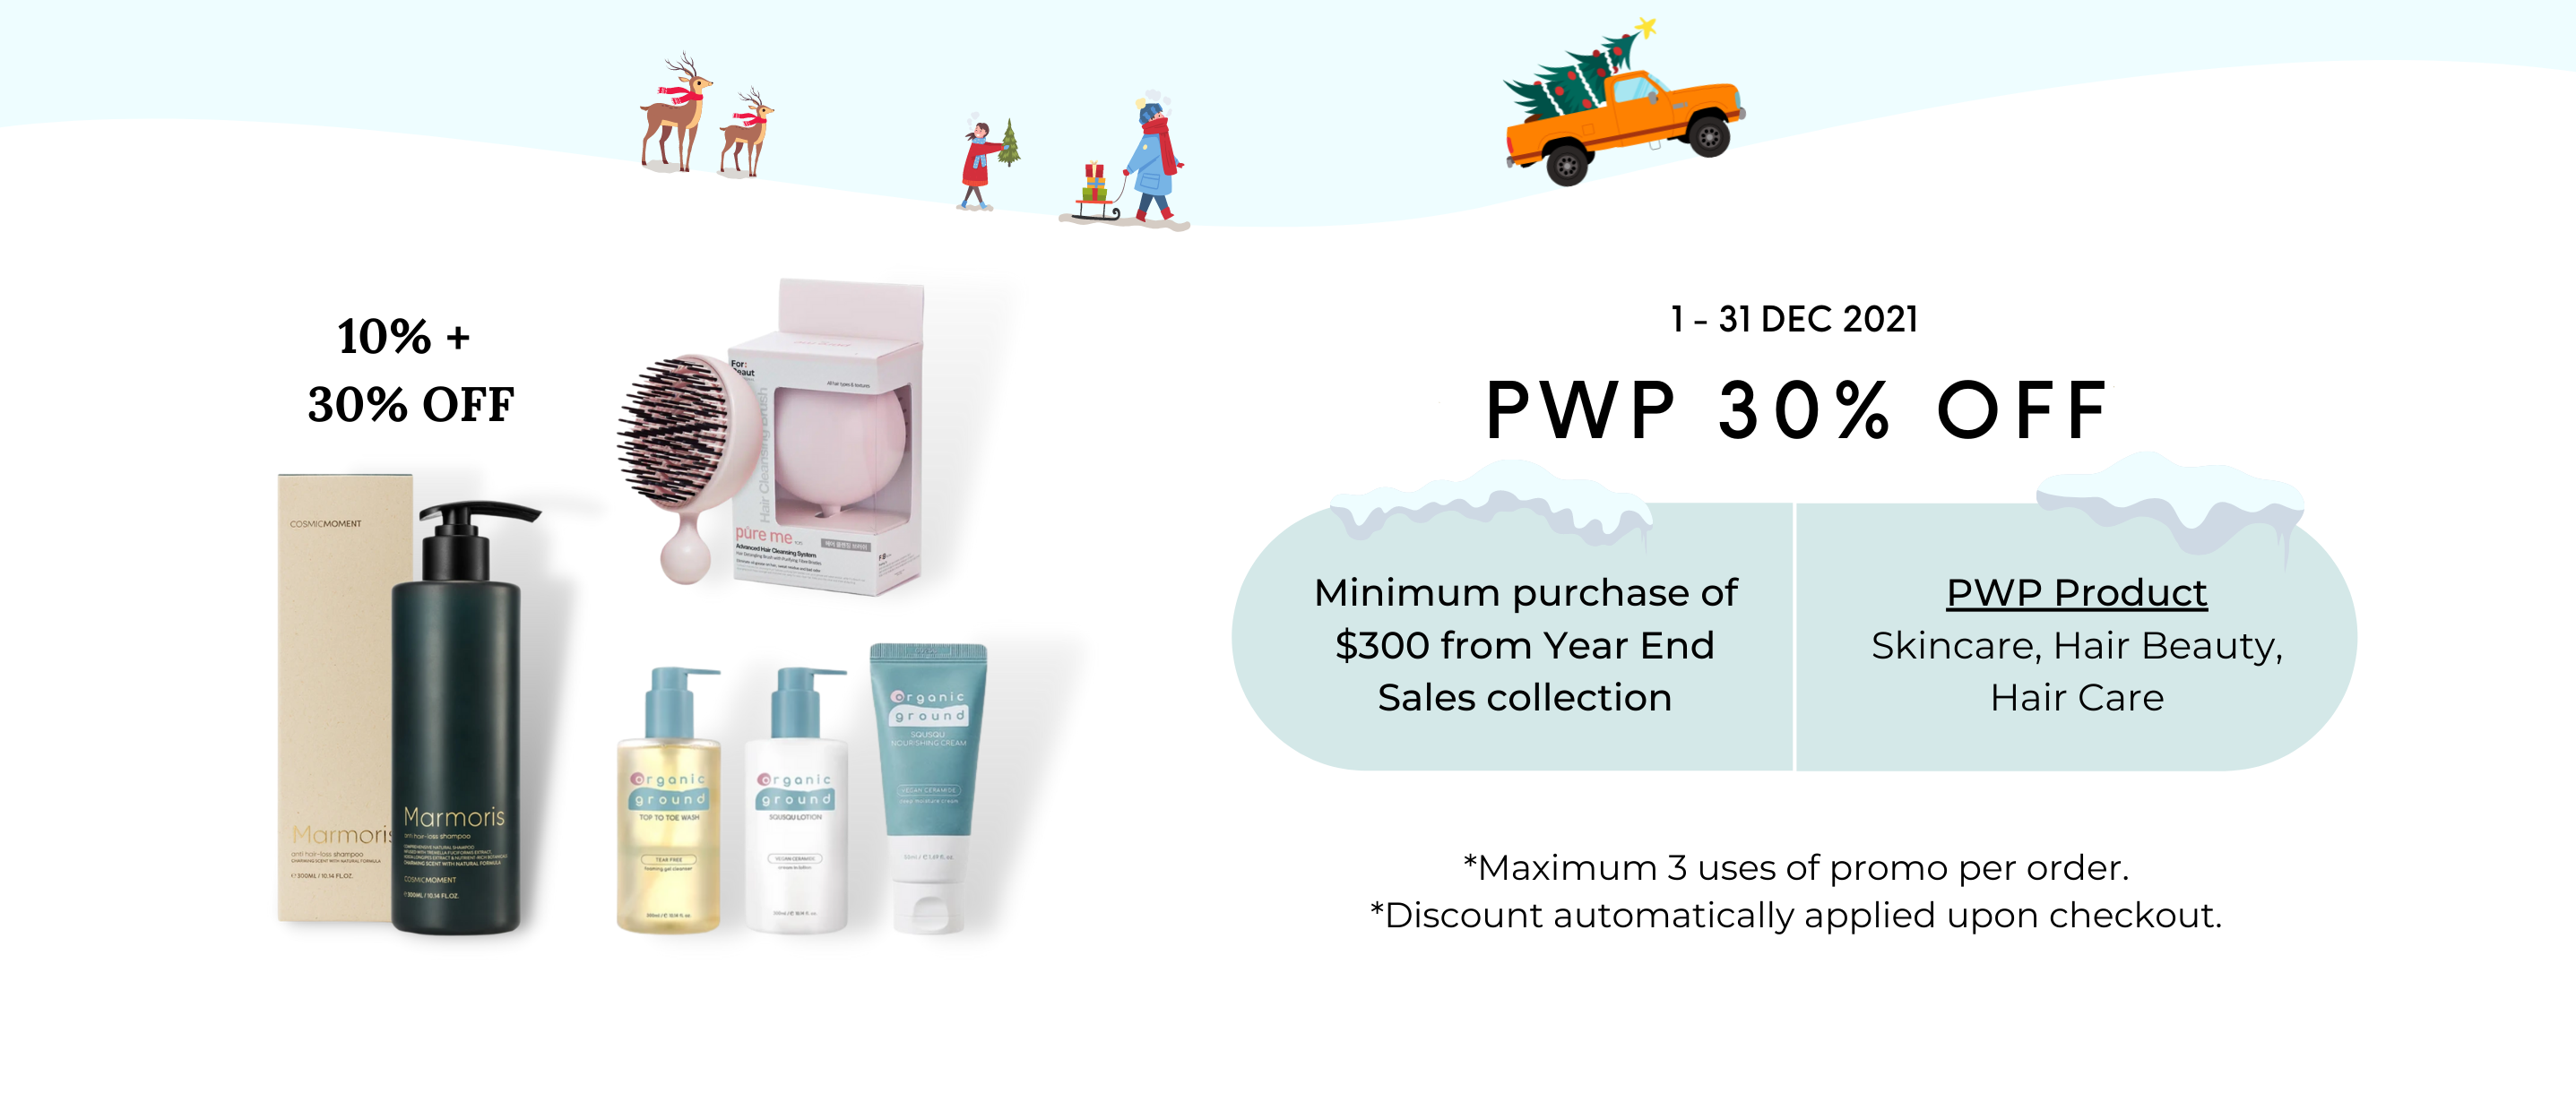 Little Baby December PWP 30% OFF